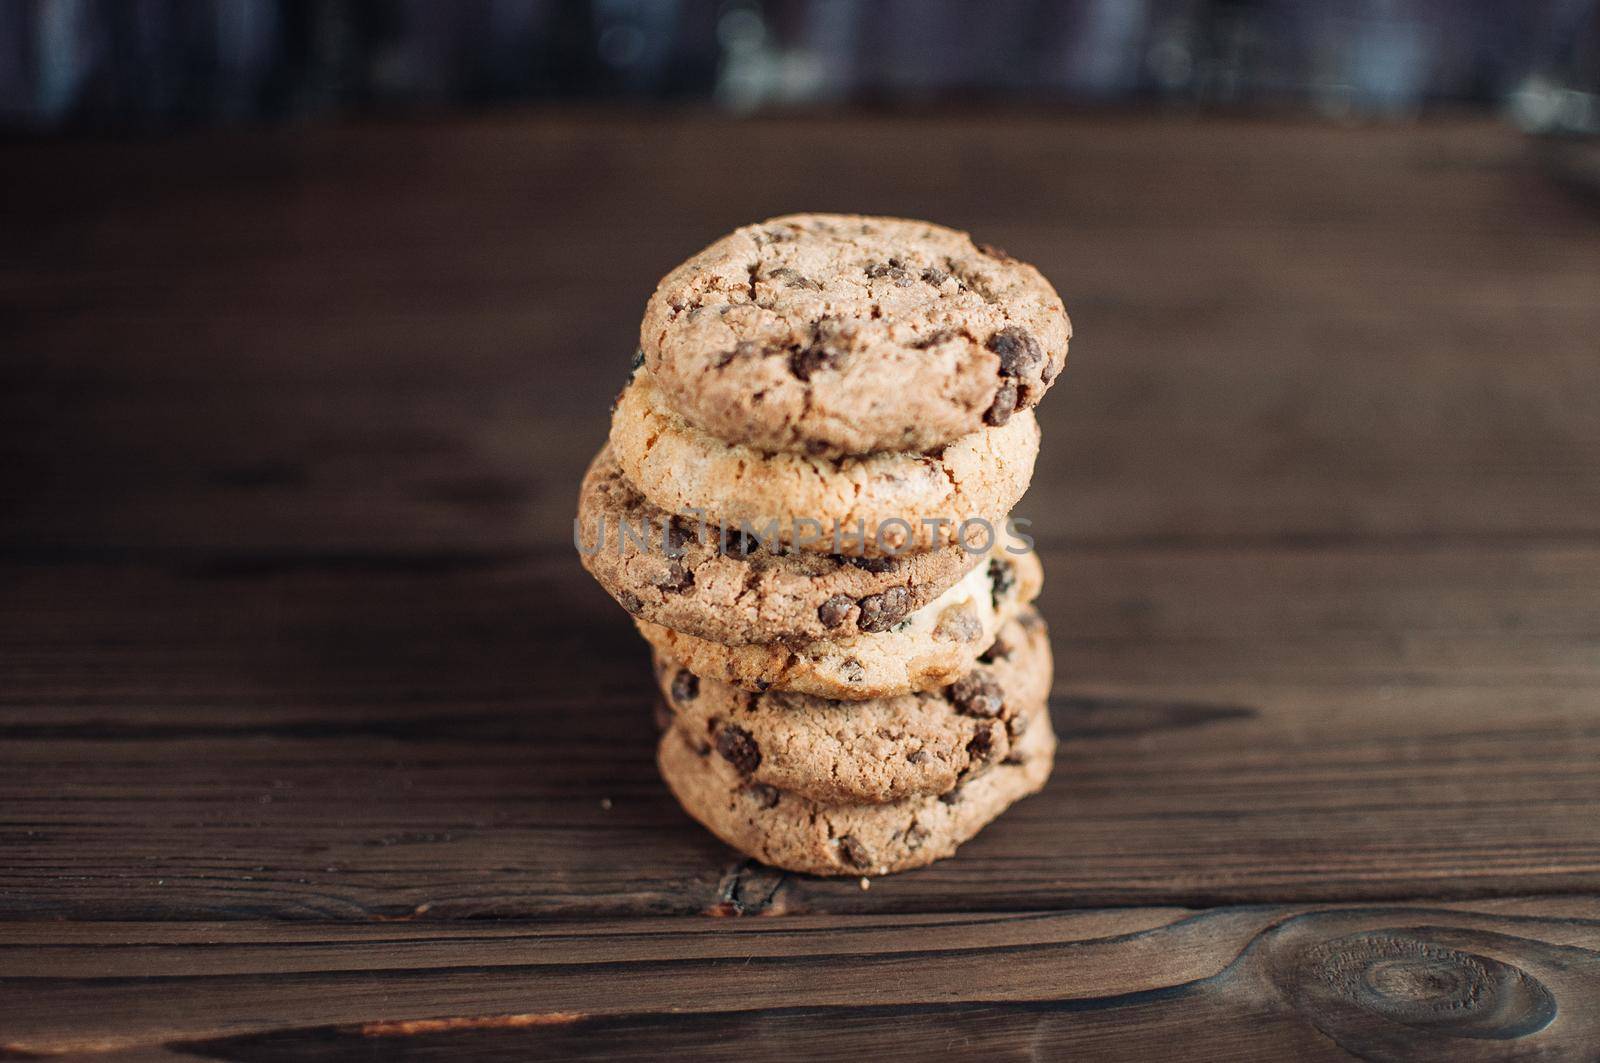 A stack of chocolate chip cookies lies on a wooden table. Rustic table. Vintage toning. Dietary useful cookies without gluten. Copy space.